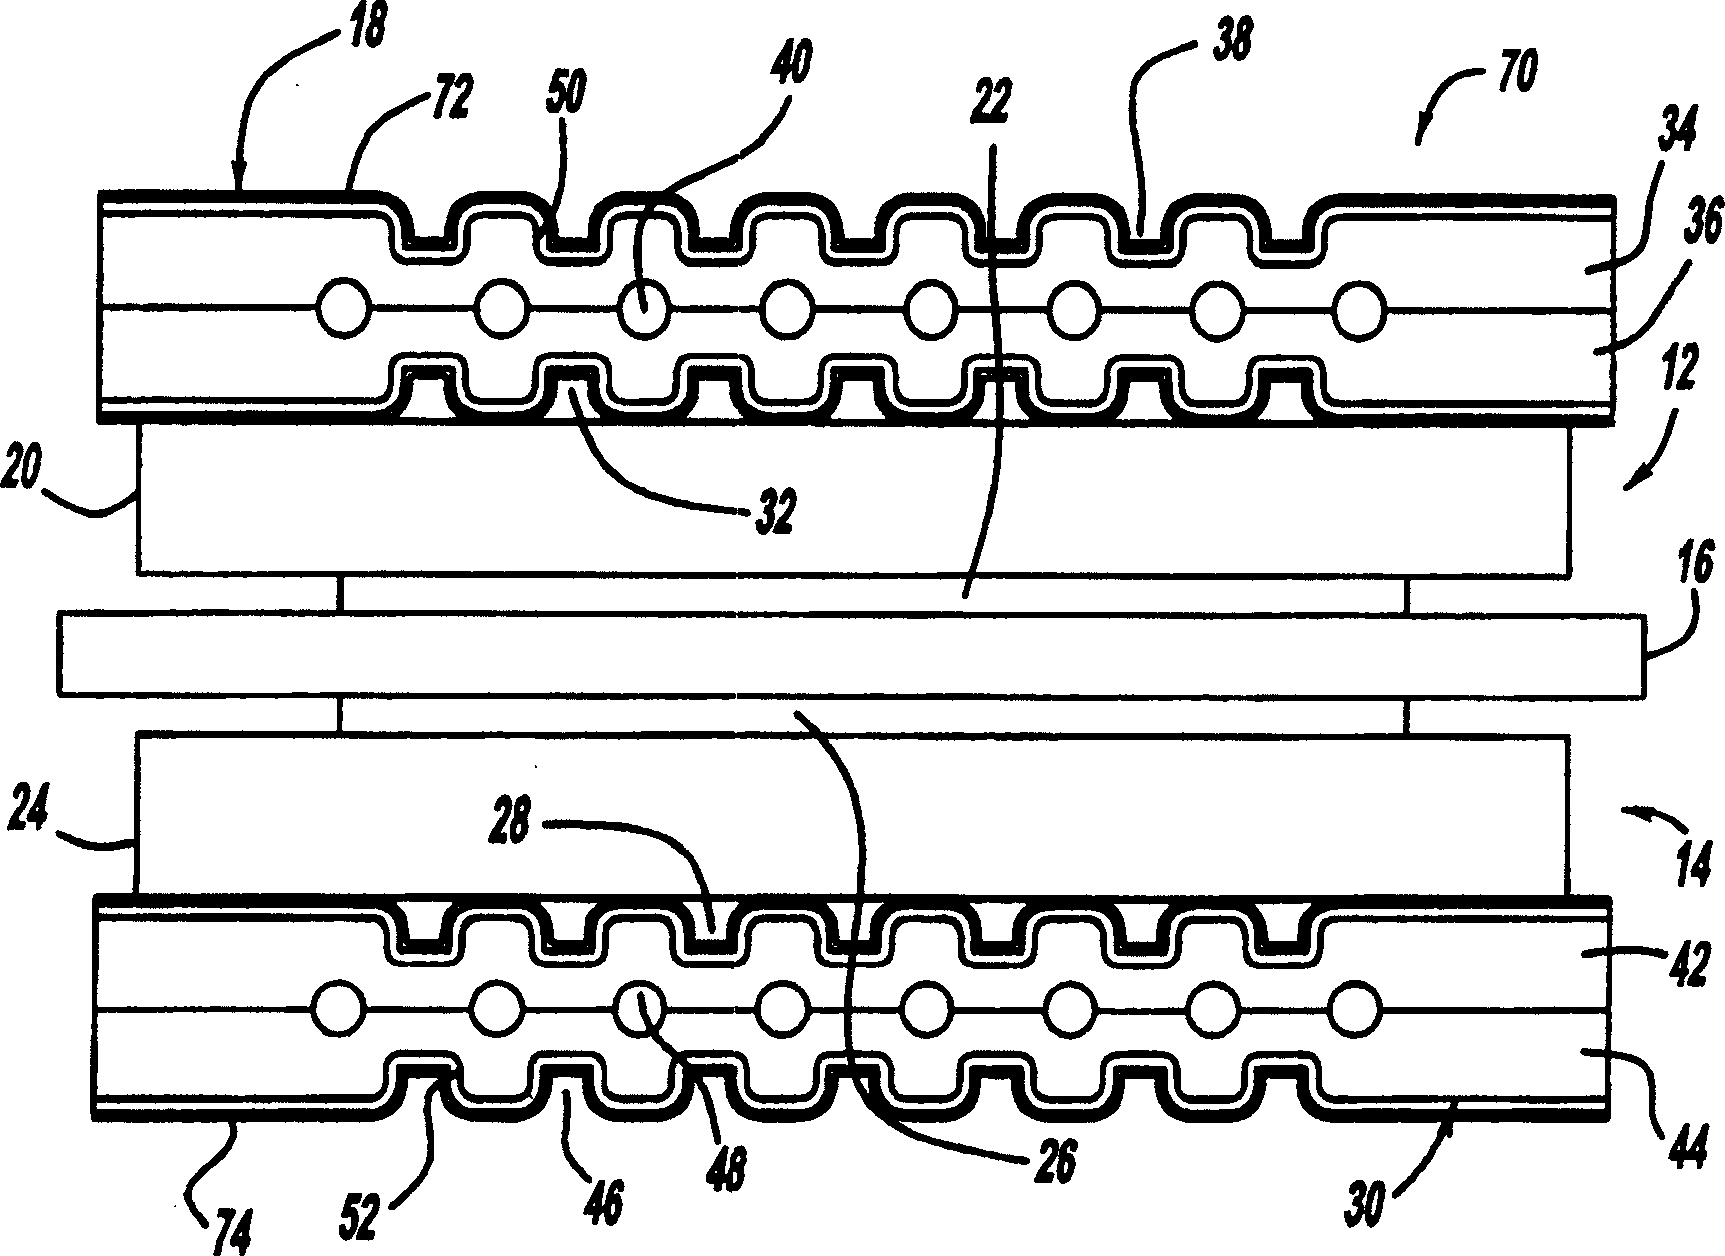 Fuel cell contact element including a tio2 layer and a conductive layer